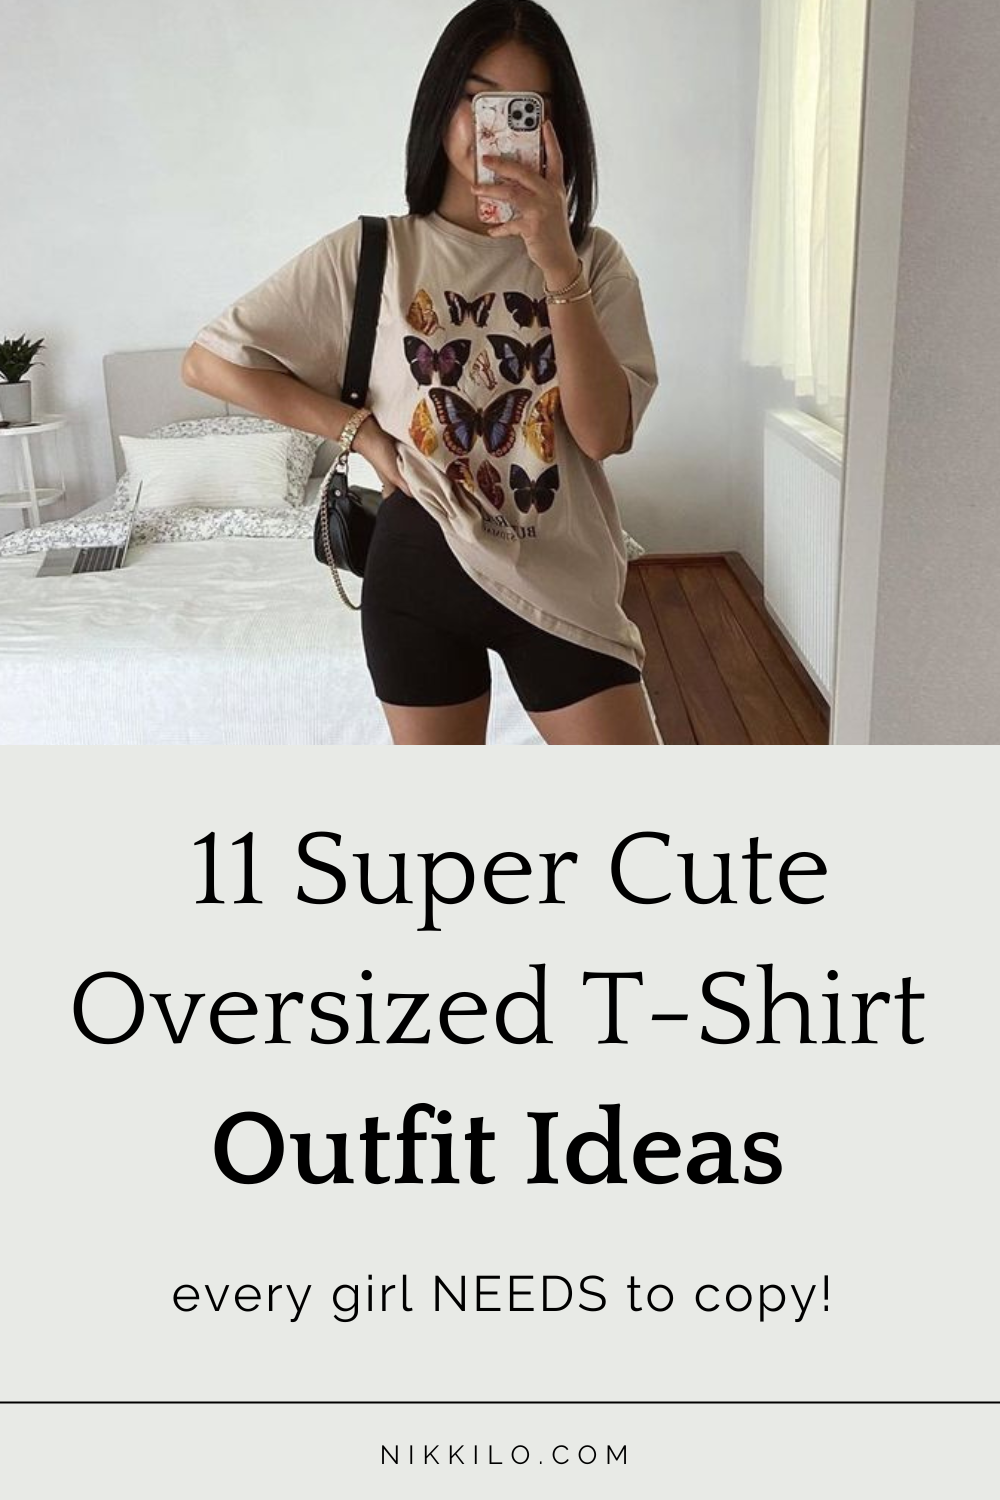 How To Wear An Oversized T-shirt – 15 Outfit Ideas